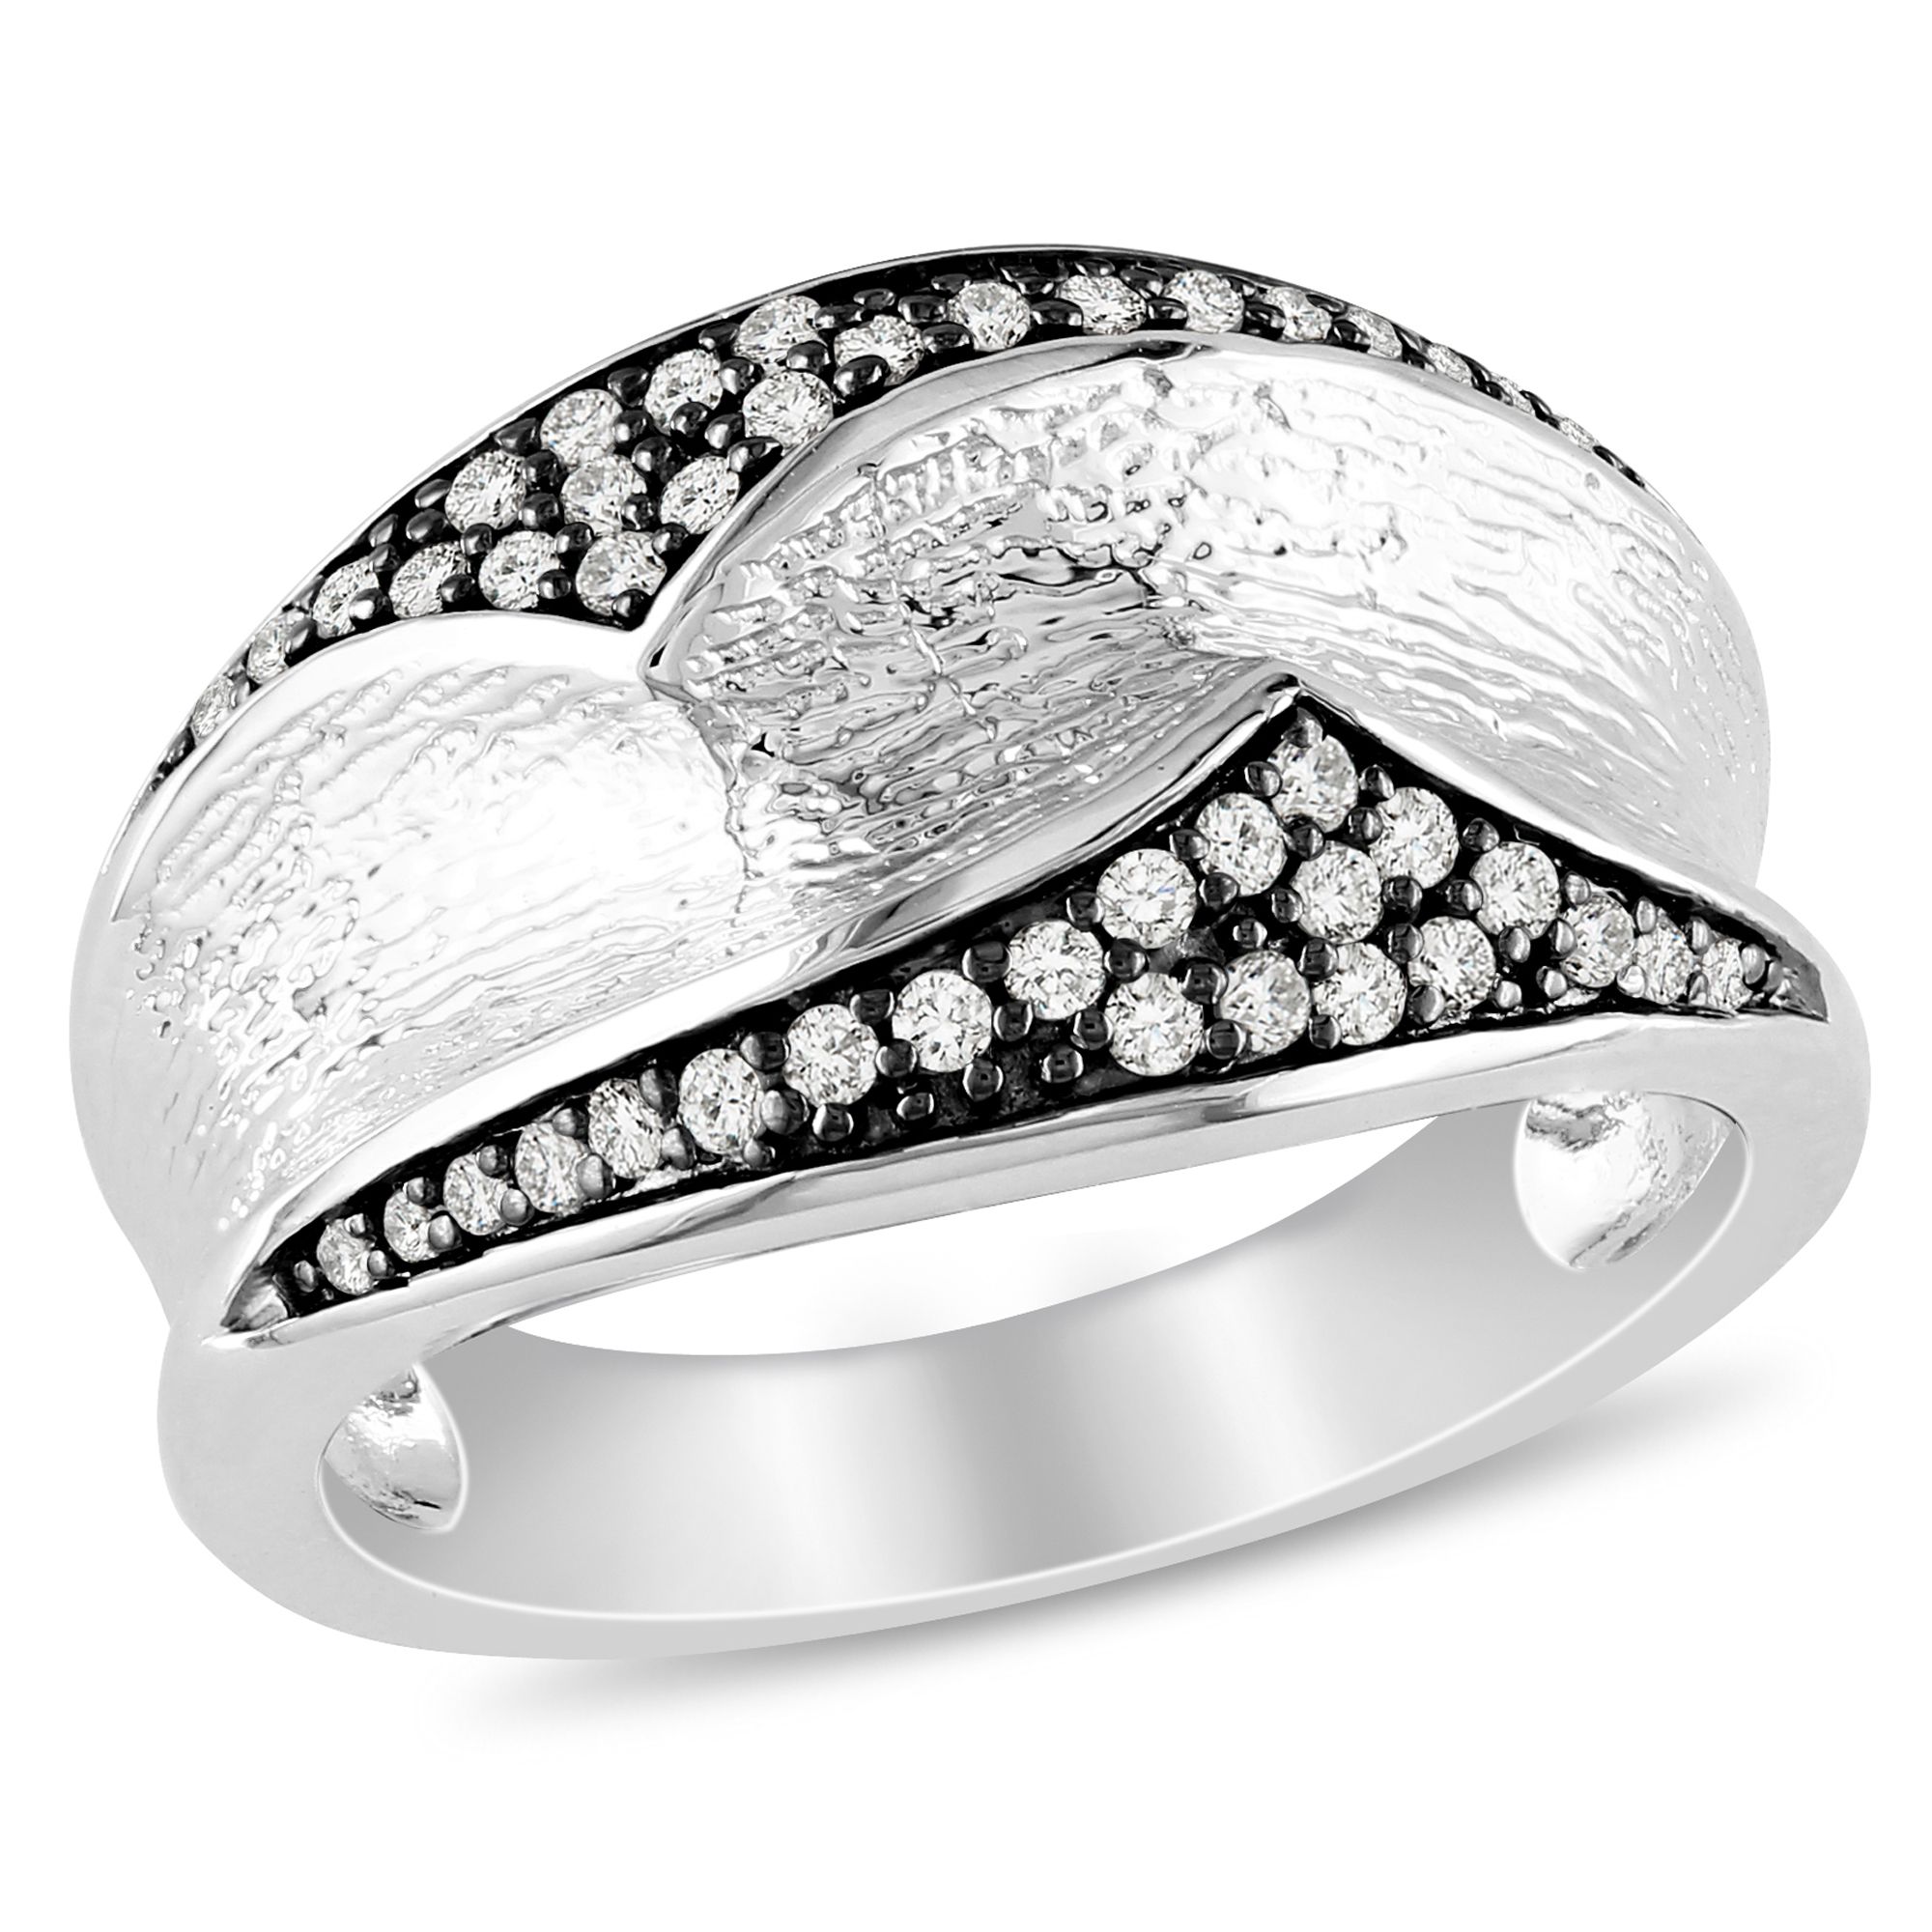 Amour Sterling Silver with Black Rhodium Plating 1/4 CT Diamond Fashion Ring (GH I3)